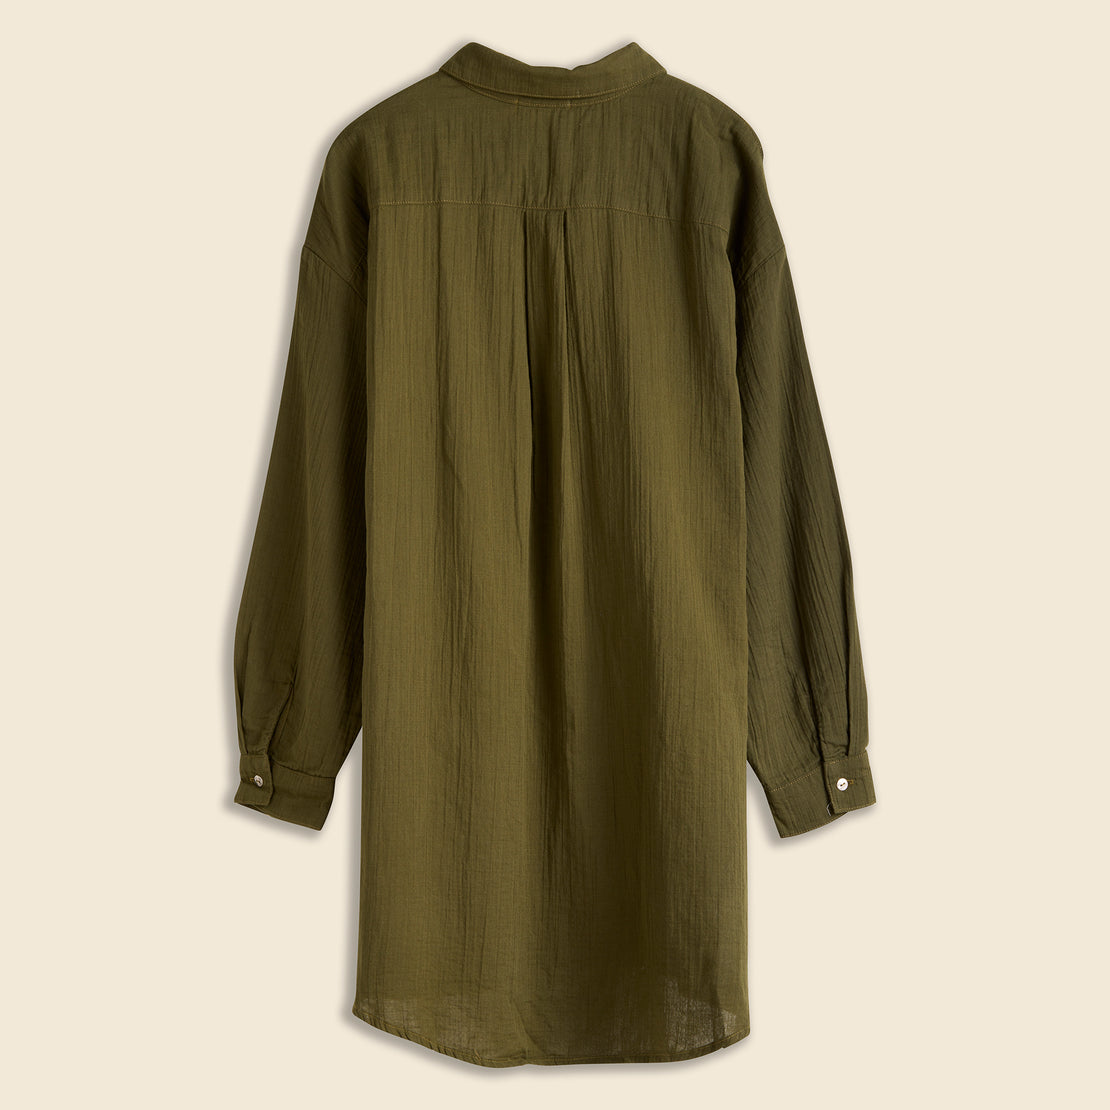 Oversized Overlay Gauze Shirt - Hunter Green - Atelier Delphine - STAG Provisions - W - Tops - L/S Woven